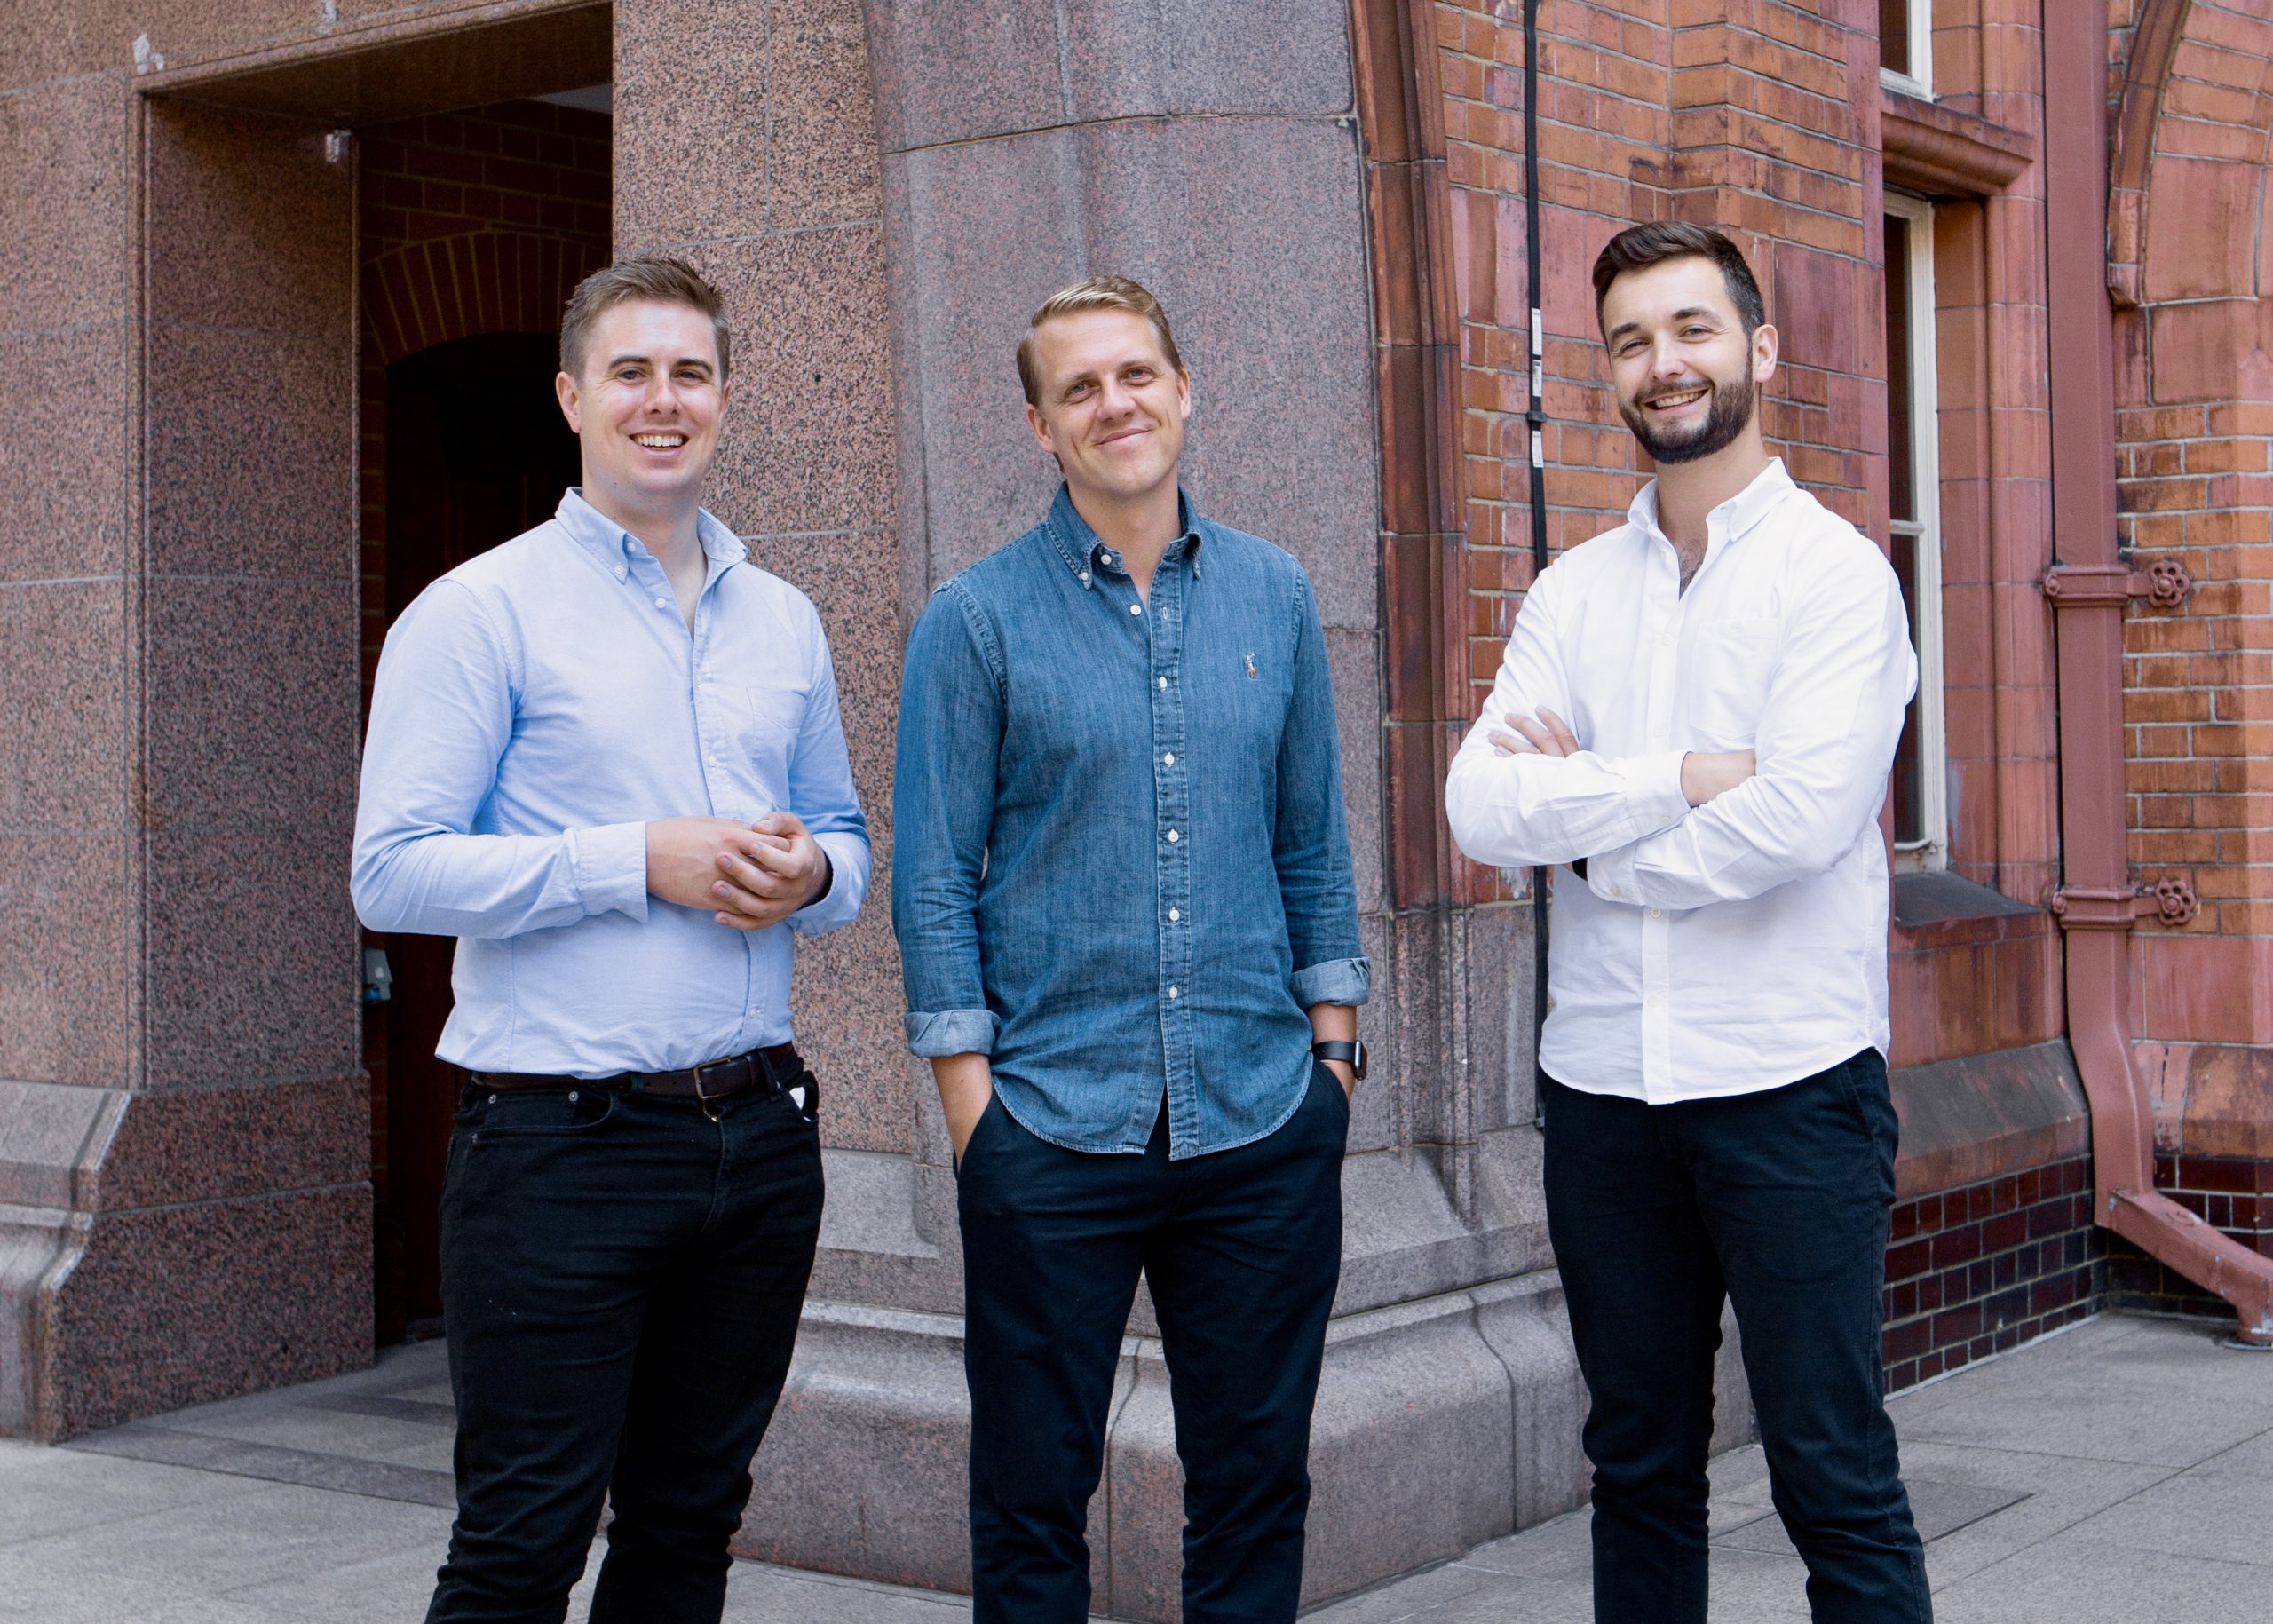 Sona Technologies secures £1.6 million Pre-Seed investment led by Speedinvest